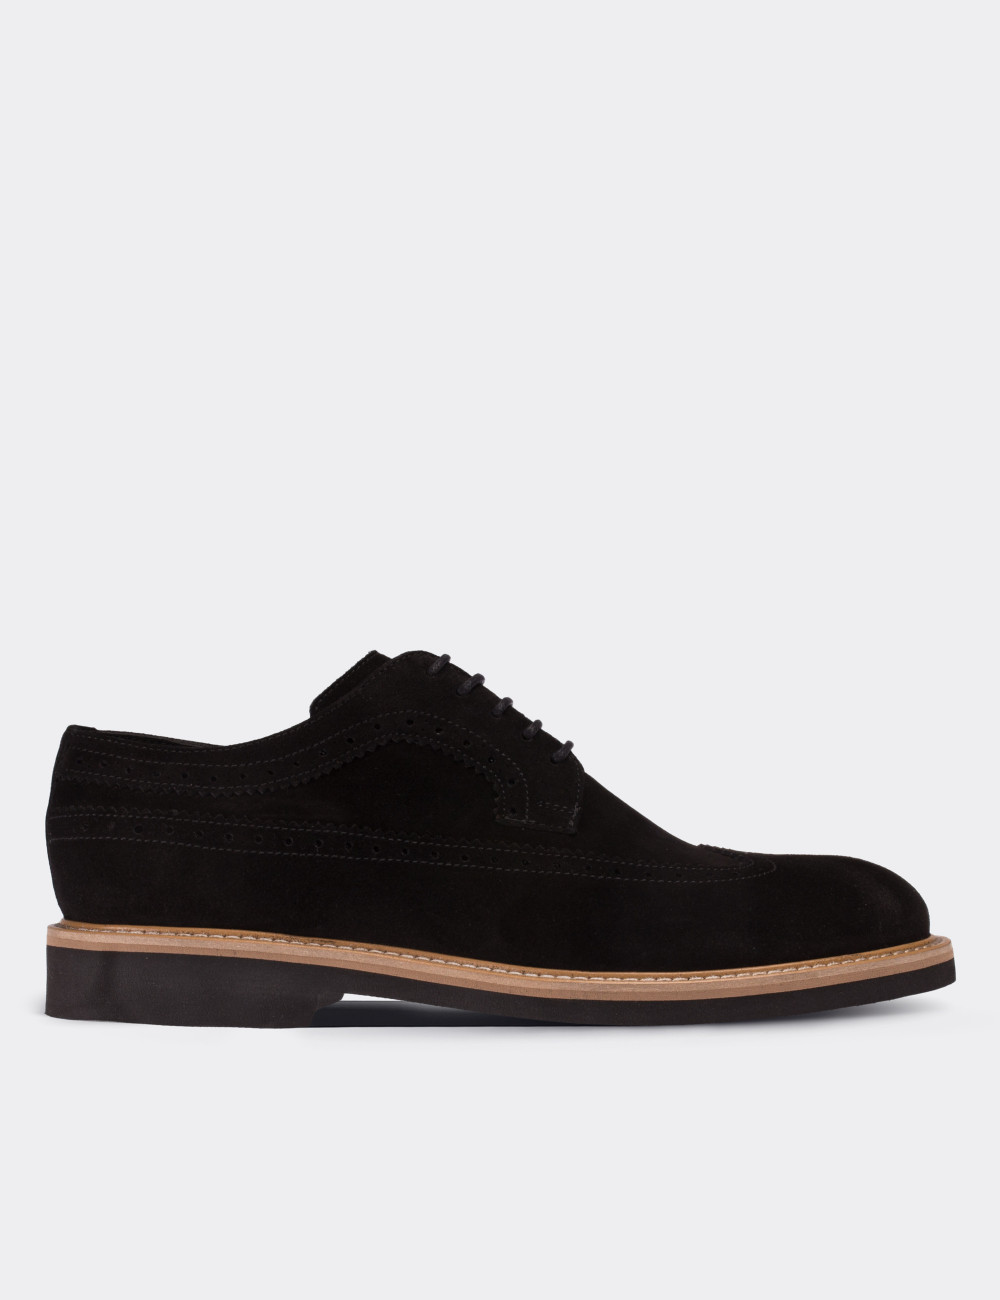 Black Suede Leather Lace-up Shoes - 01293MSYHE28